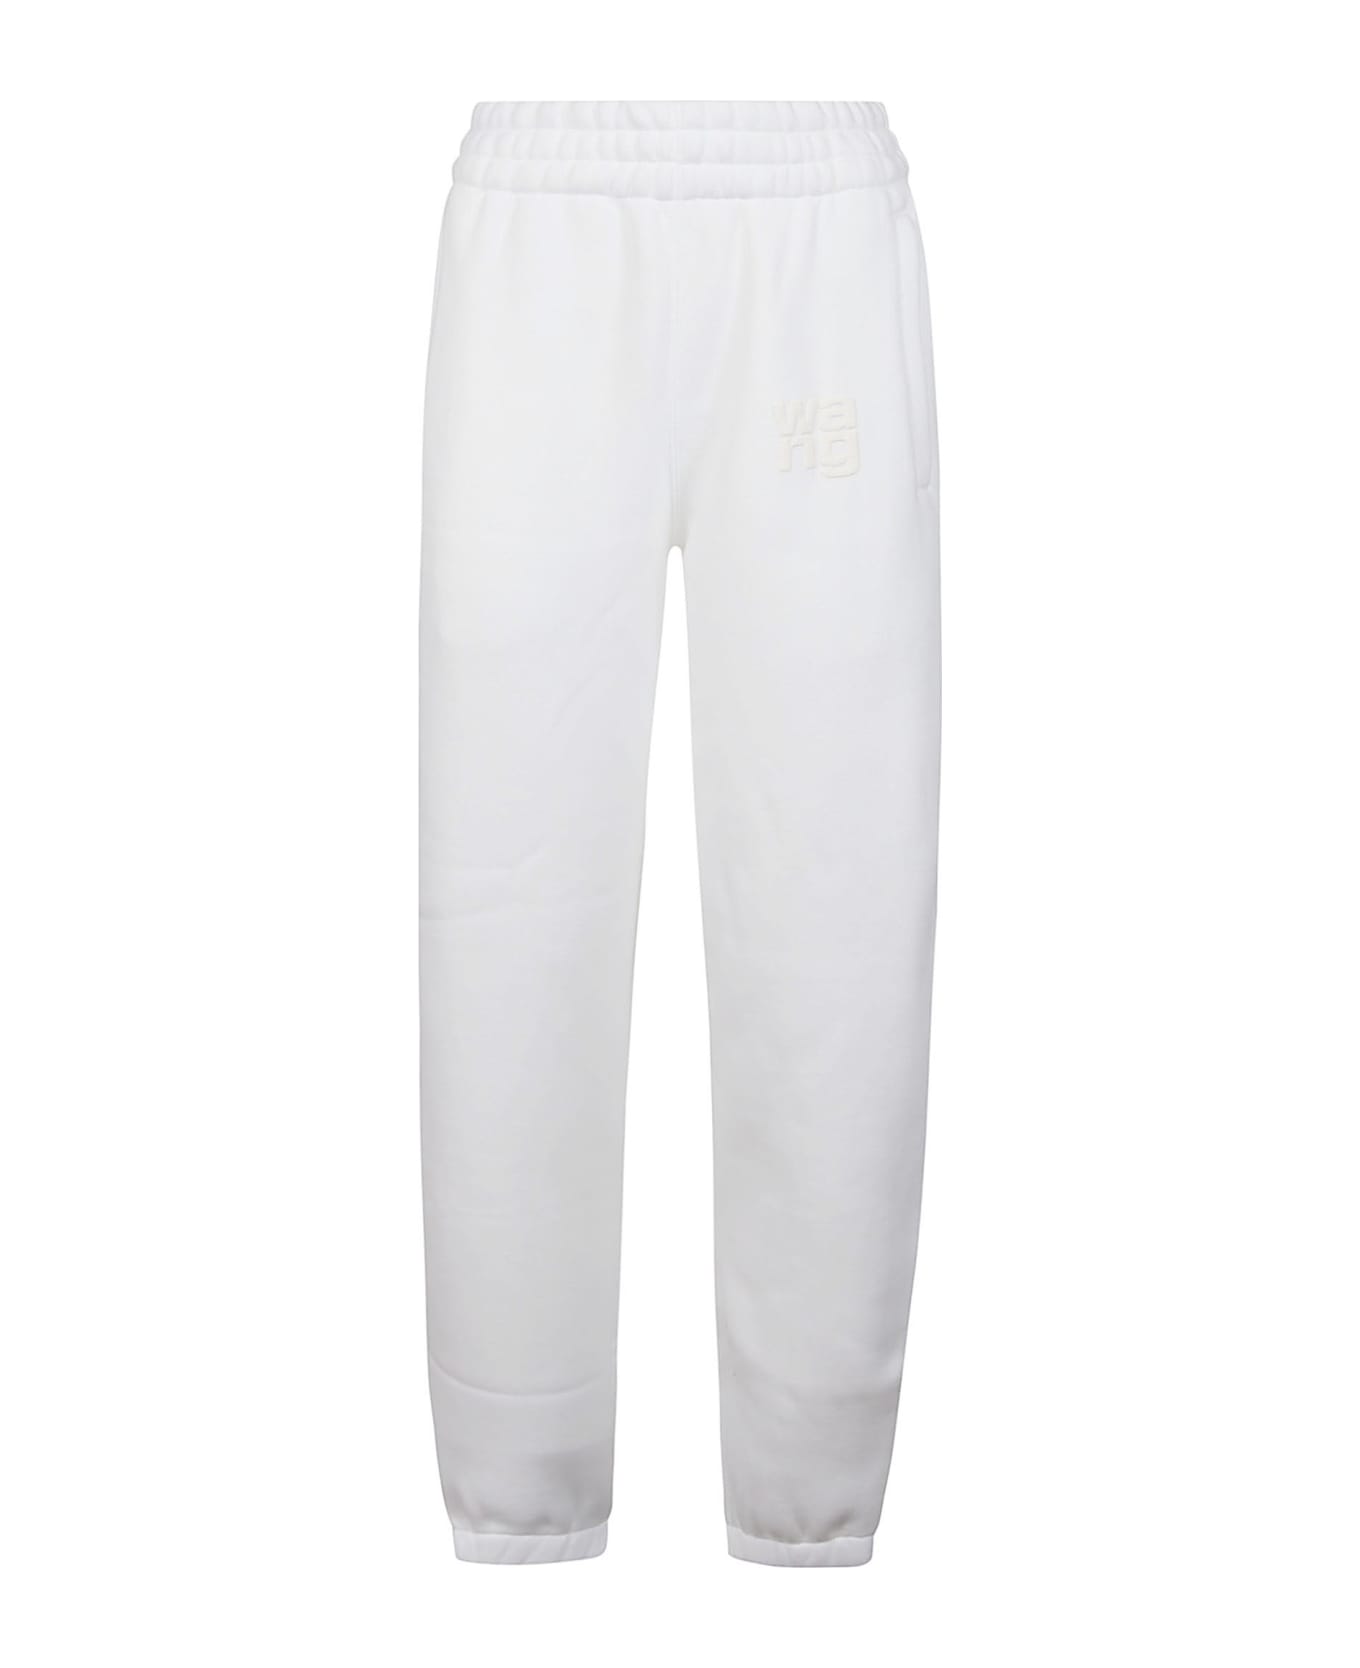 T by Alexander Wang Puff Paint Logo Esential Terry Classic Sweatpant - White スウェットパンツ